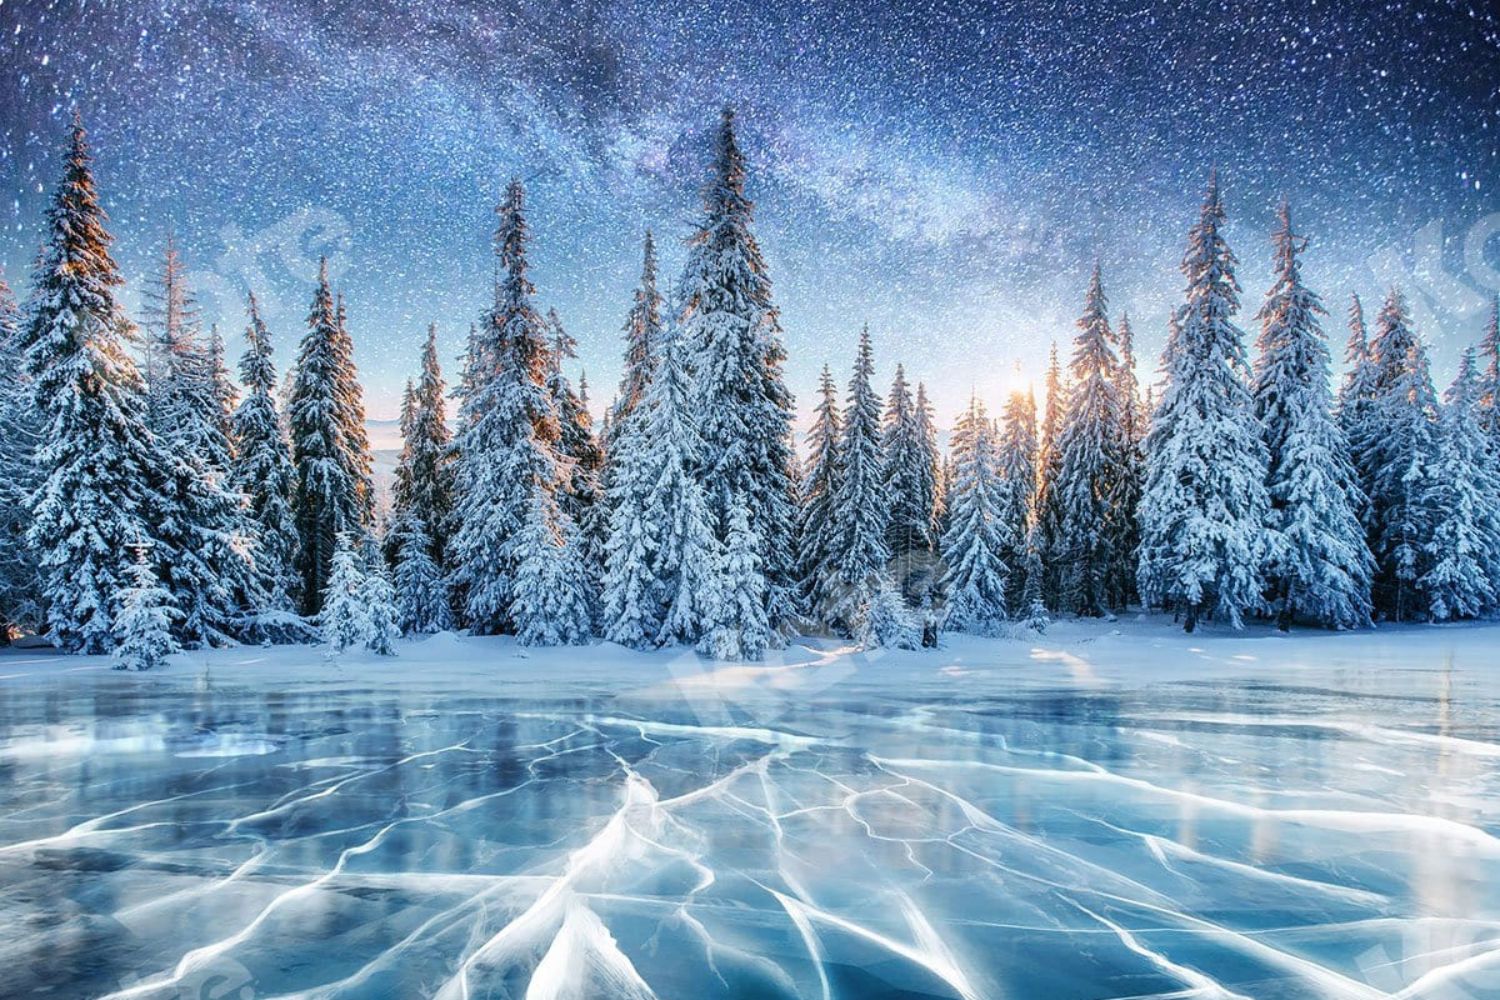 7 Tips for Beautiful Photos in Icy Cold Weather